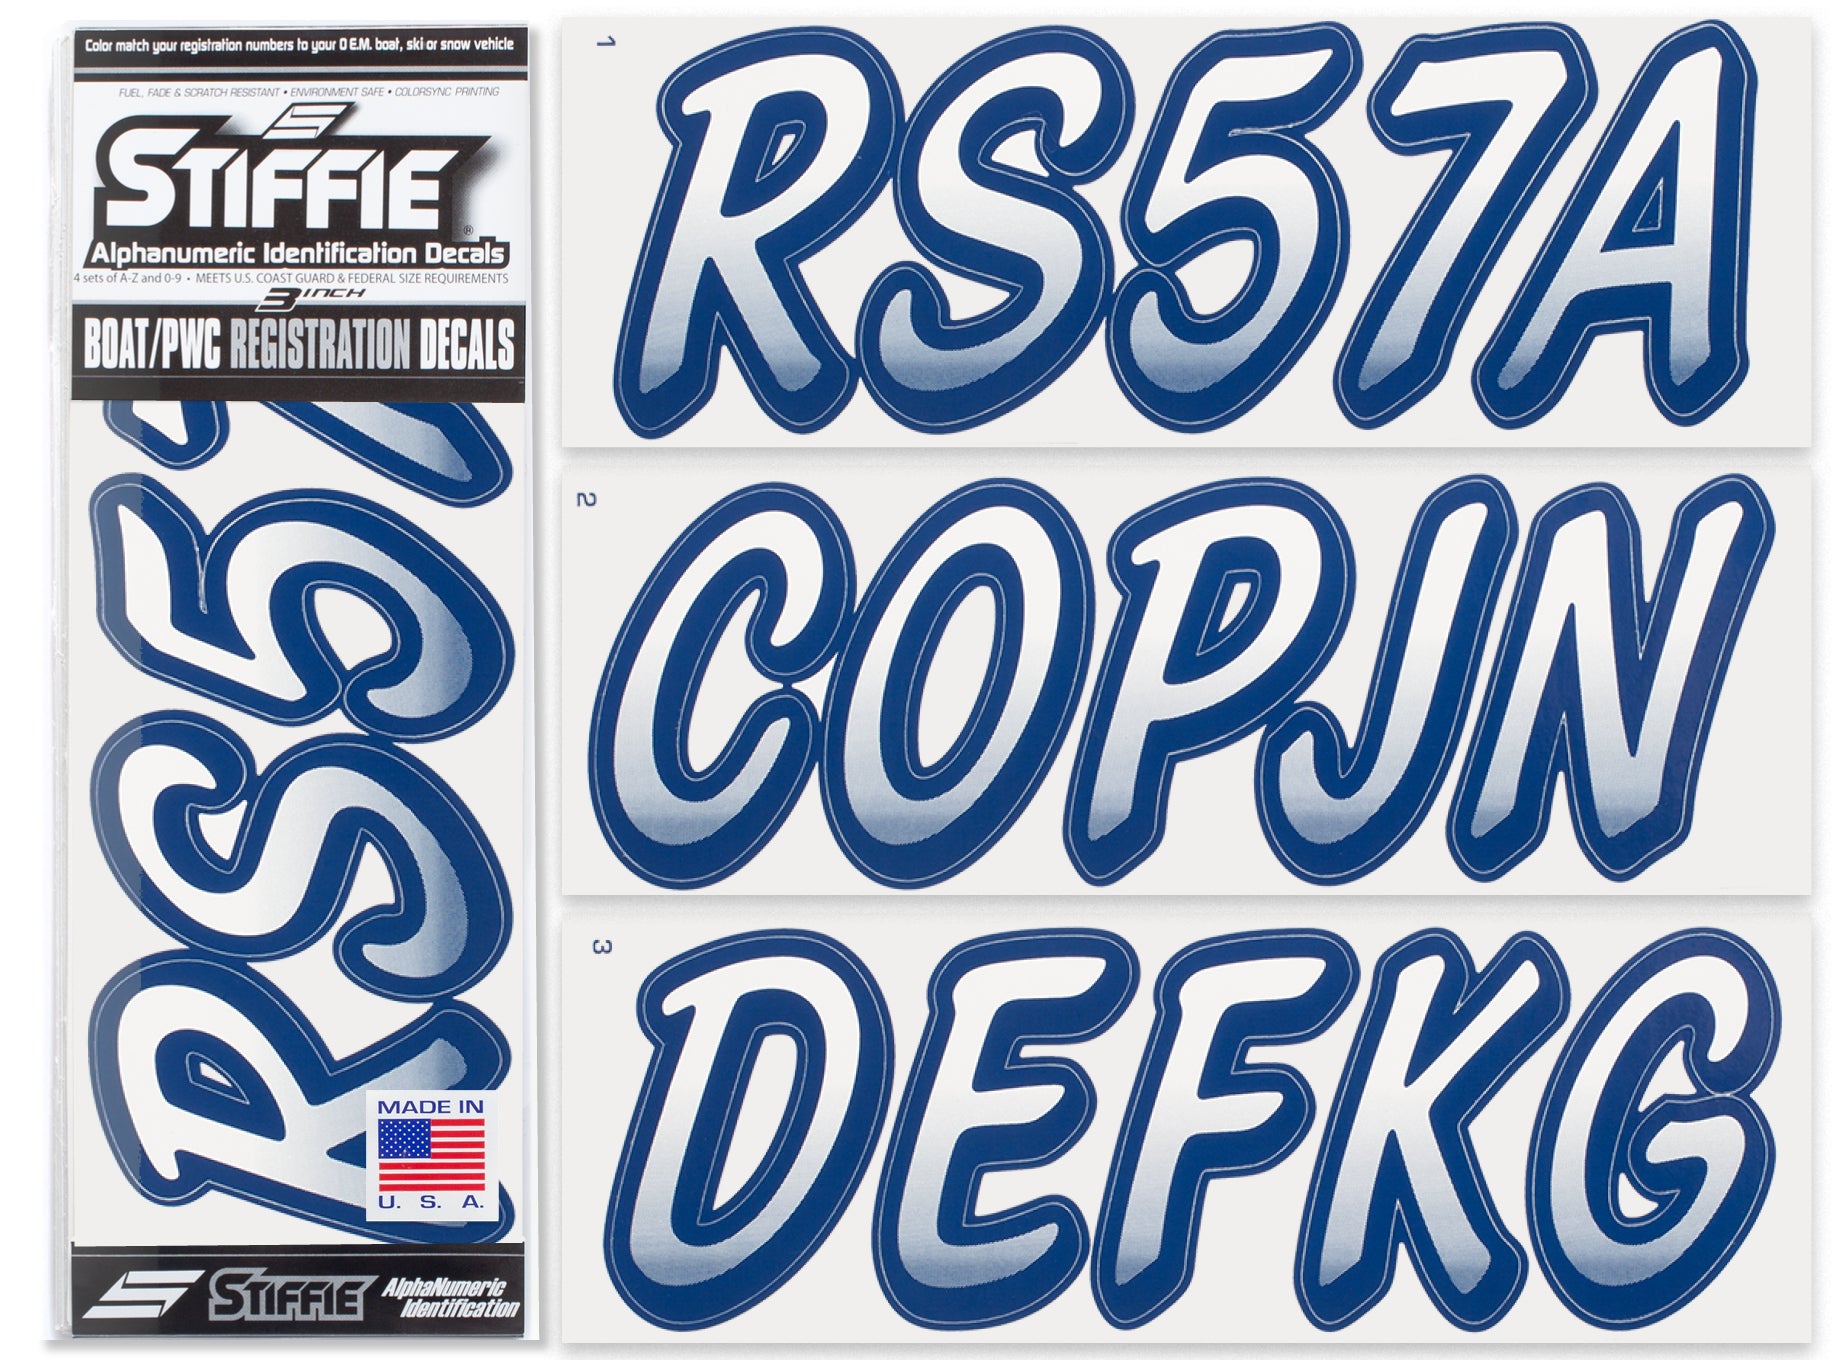 STIFFIE Whipline White/Navy 3" Alpha-Numeric Registration Identification Numbers Stickers Decals for Boats & Personal Watercraft